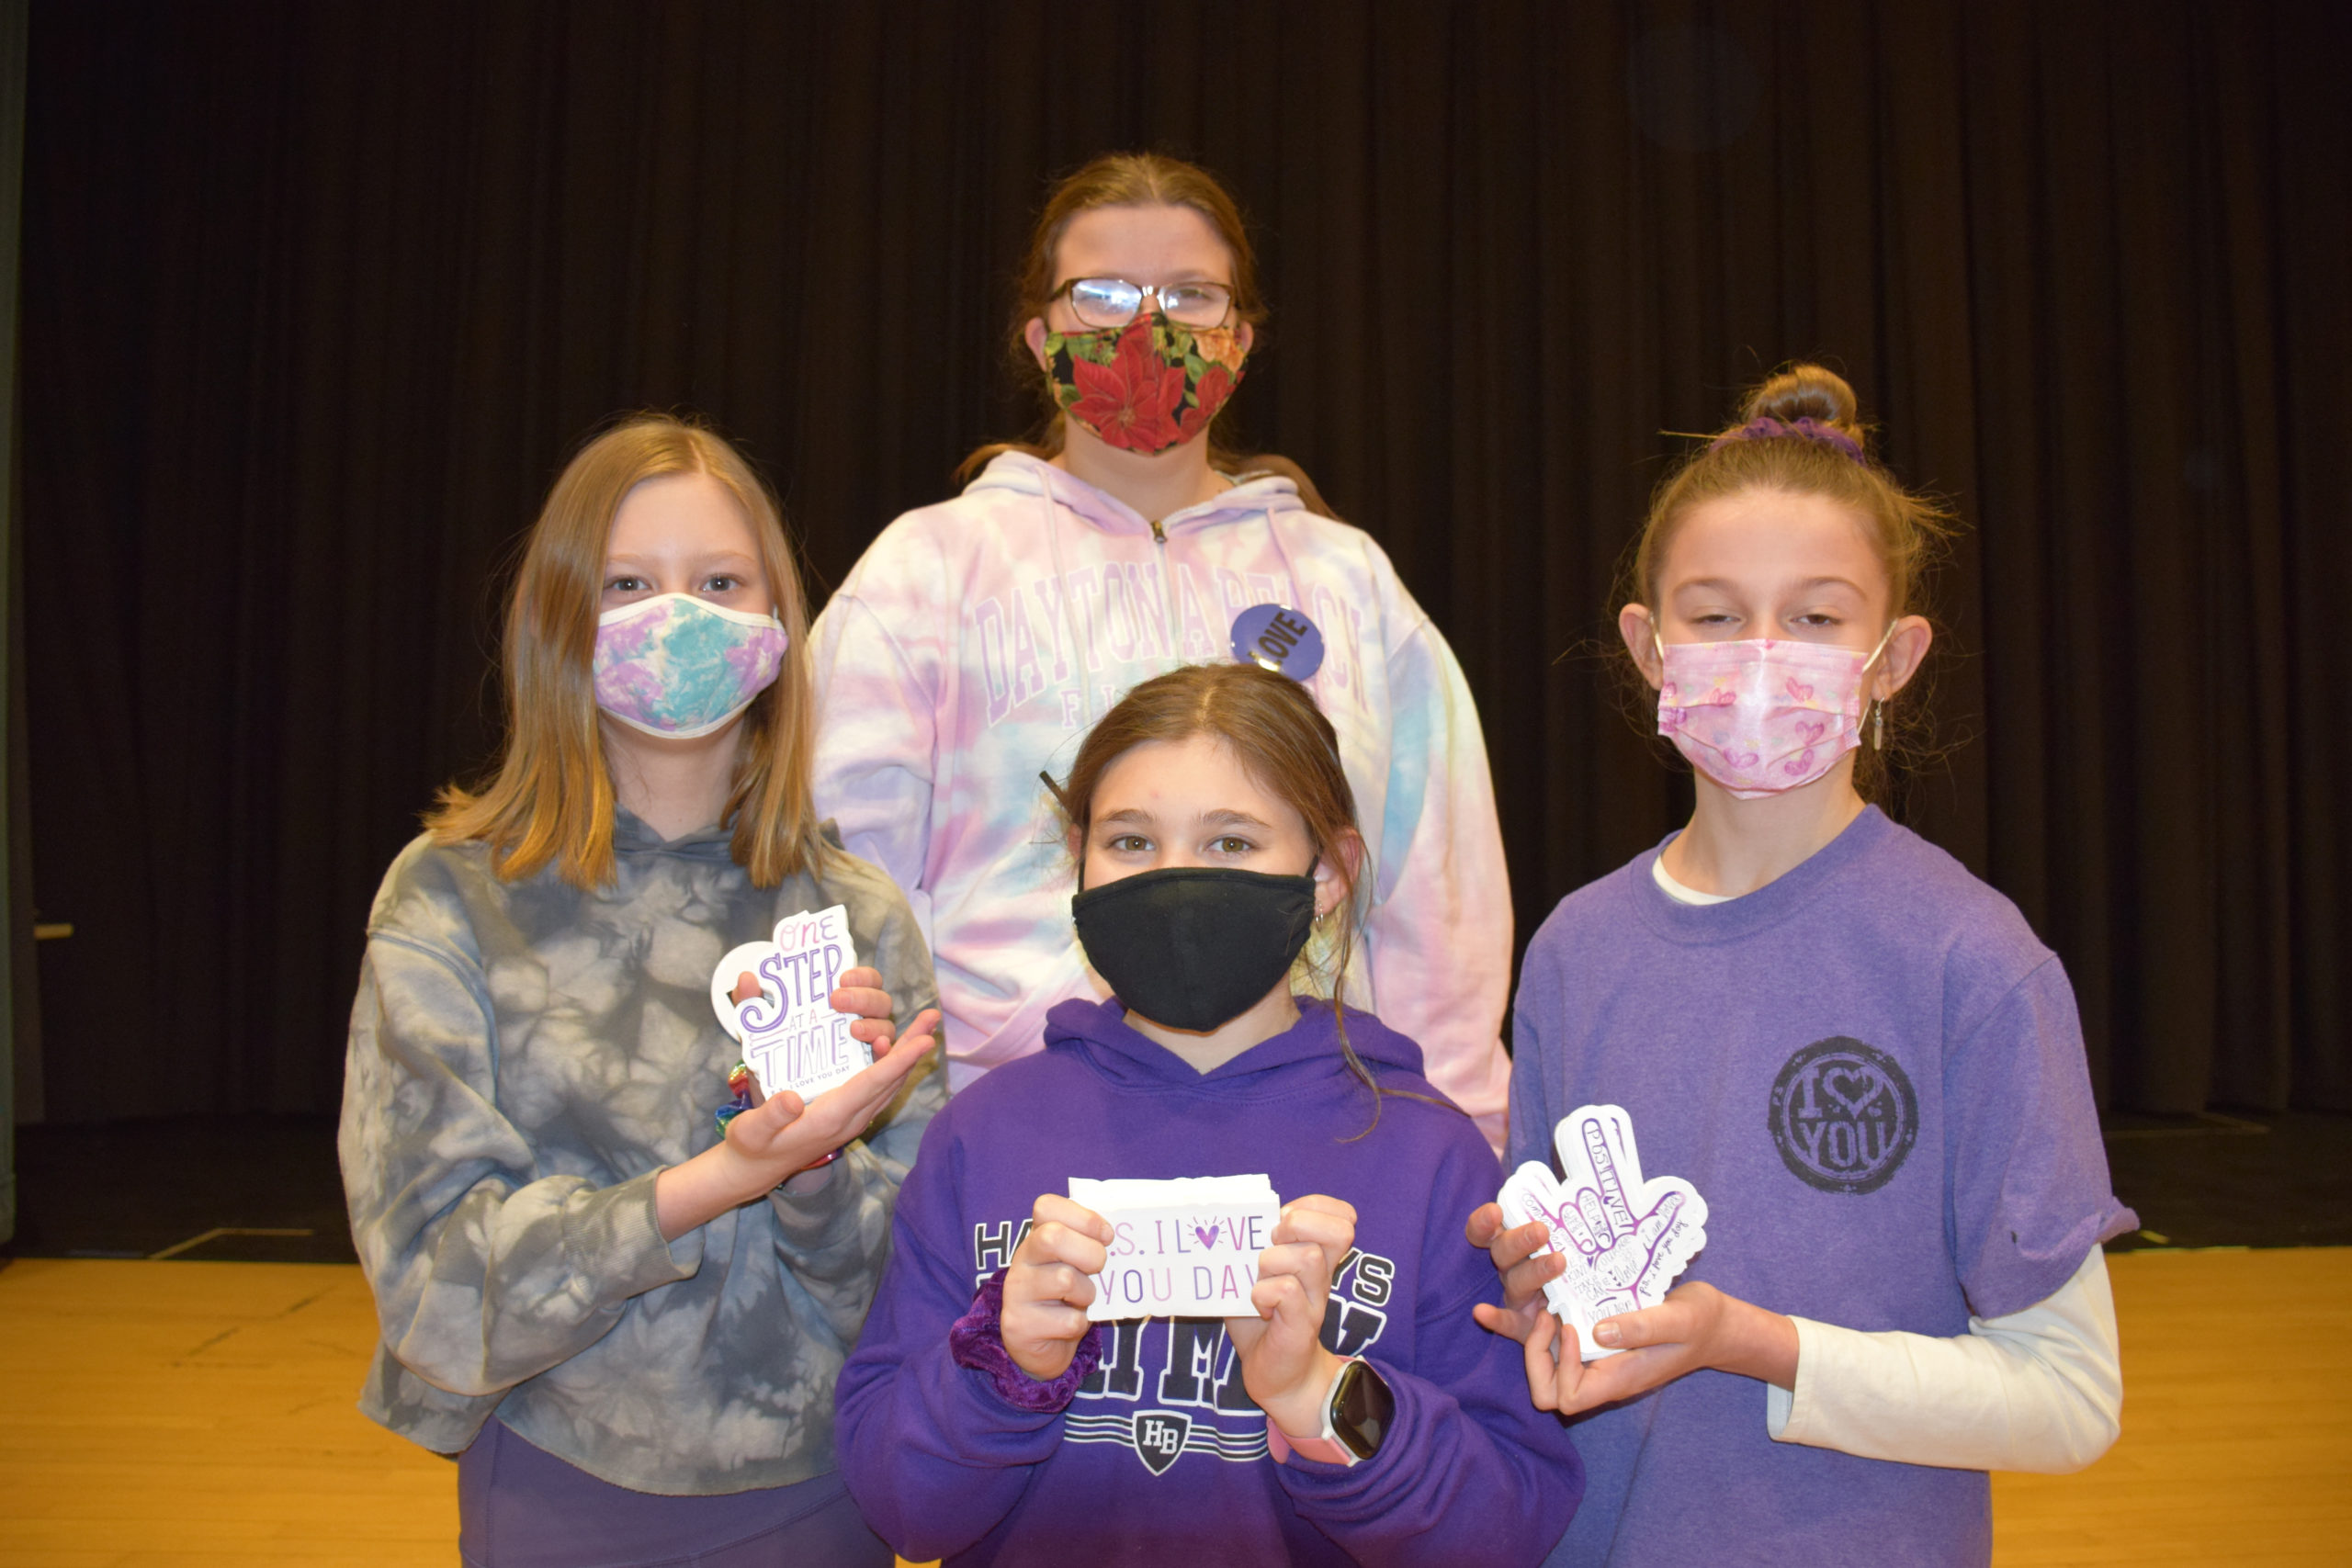 Hampton Bays Middle School students recently took part in P.S. I Love You Day.